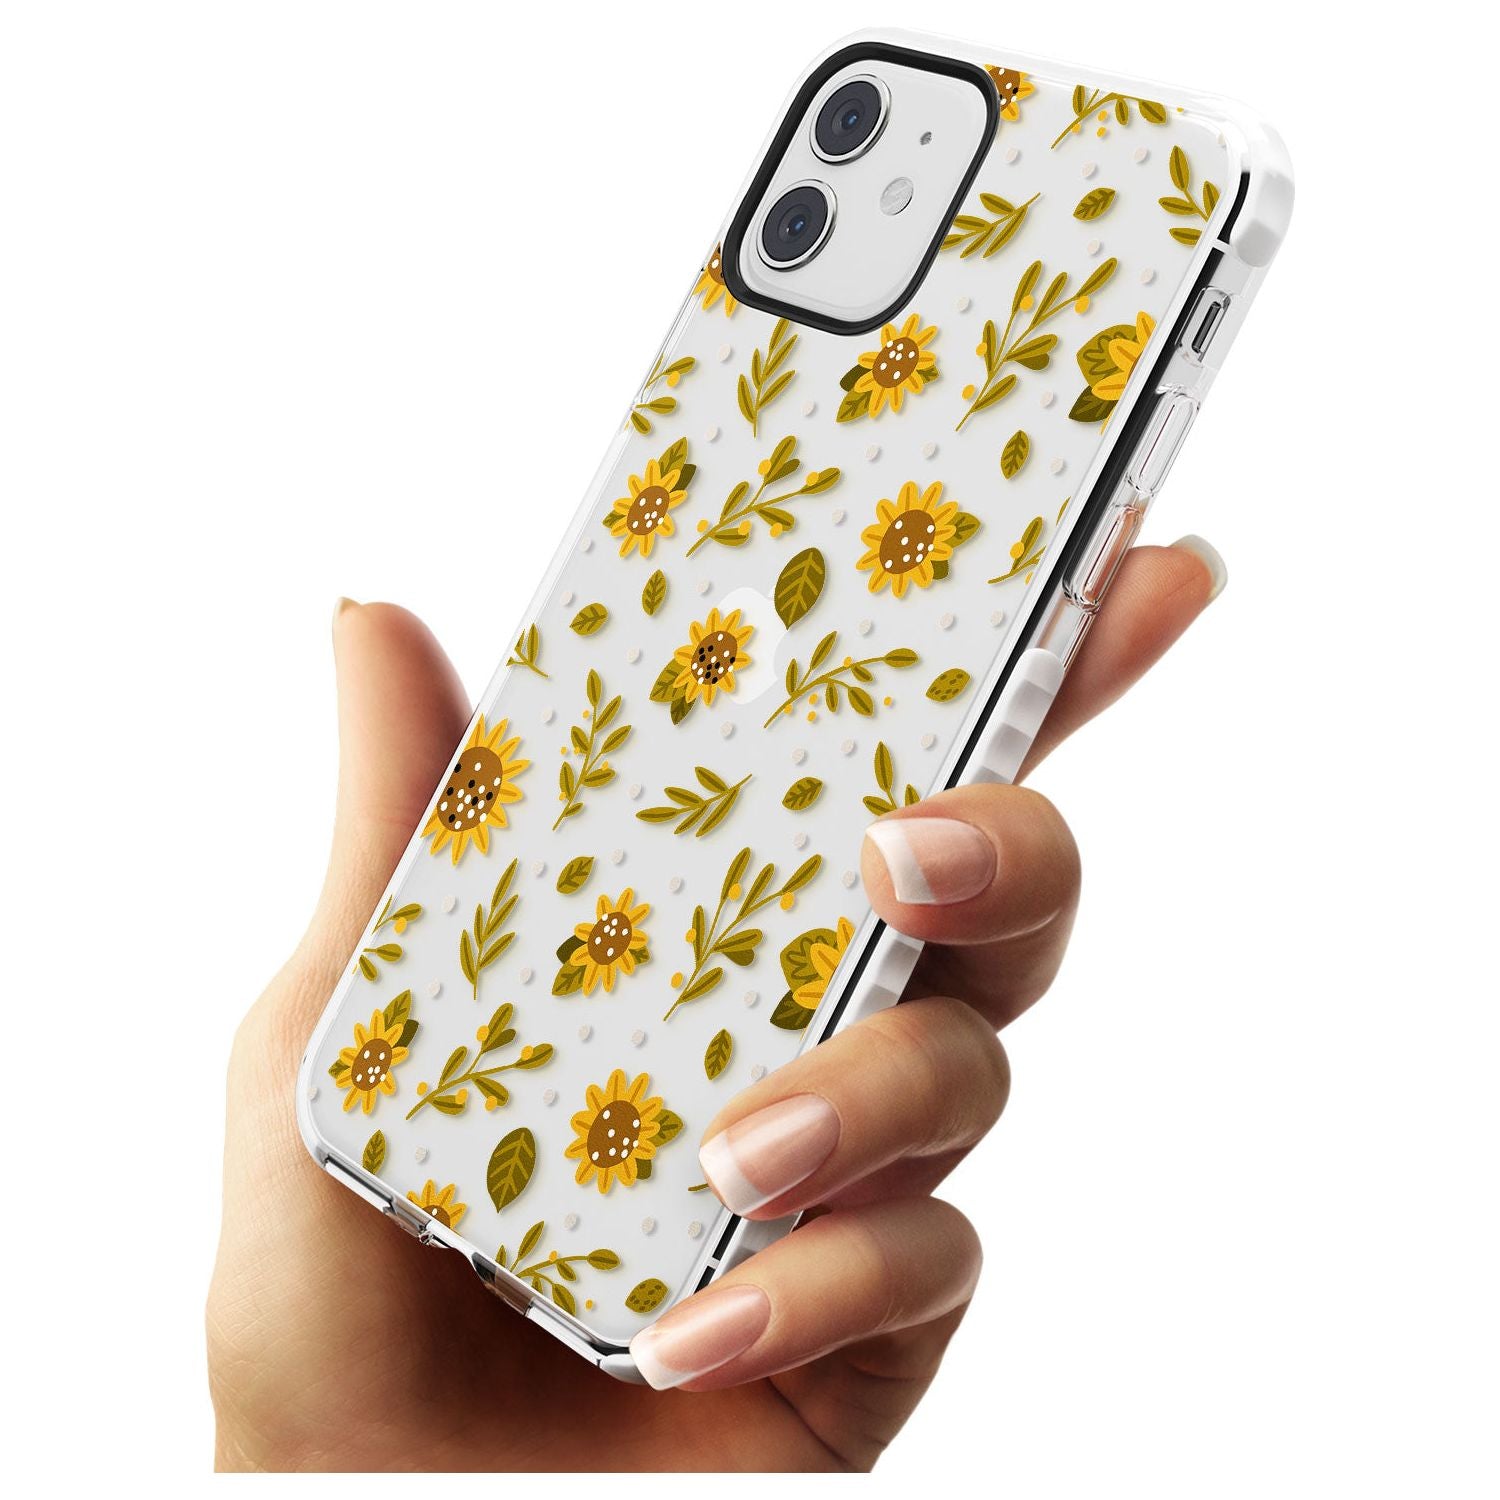 Sweet as Honey Patterns: Sunflowers (Clear) Impact Phone Case for iPhone 11